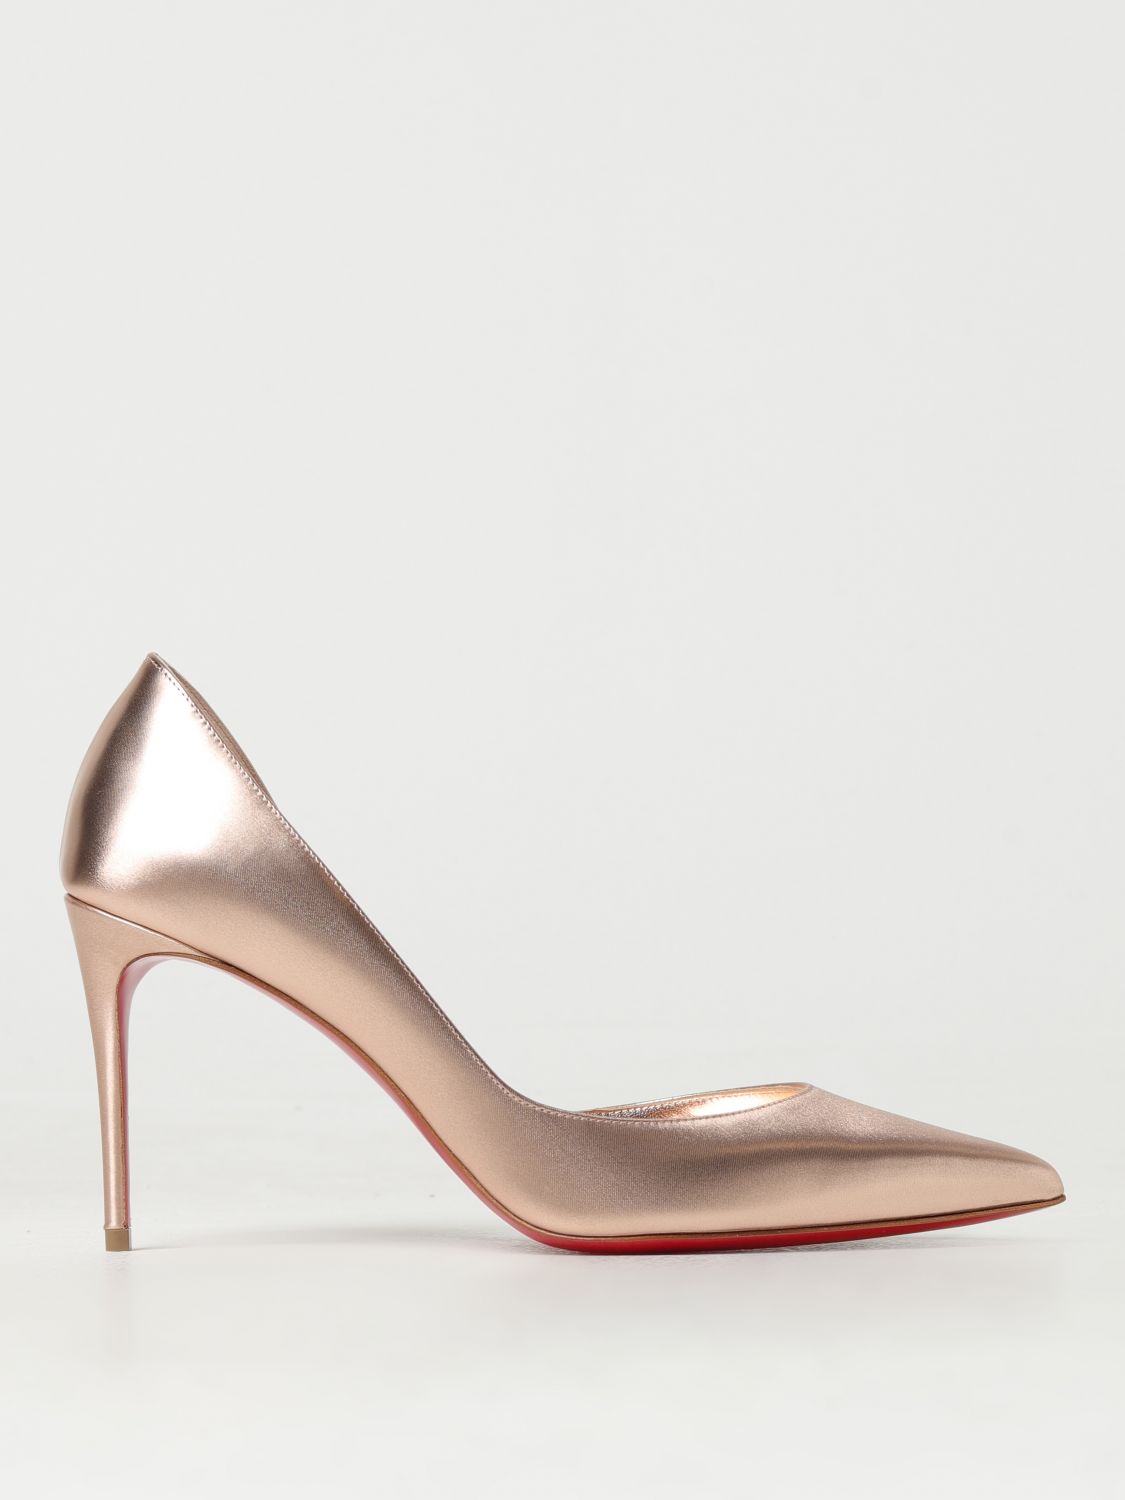 CHRISTIAN LOUBOUTIN LEATHER PUMPS,404037047